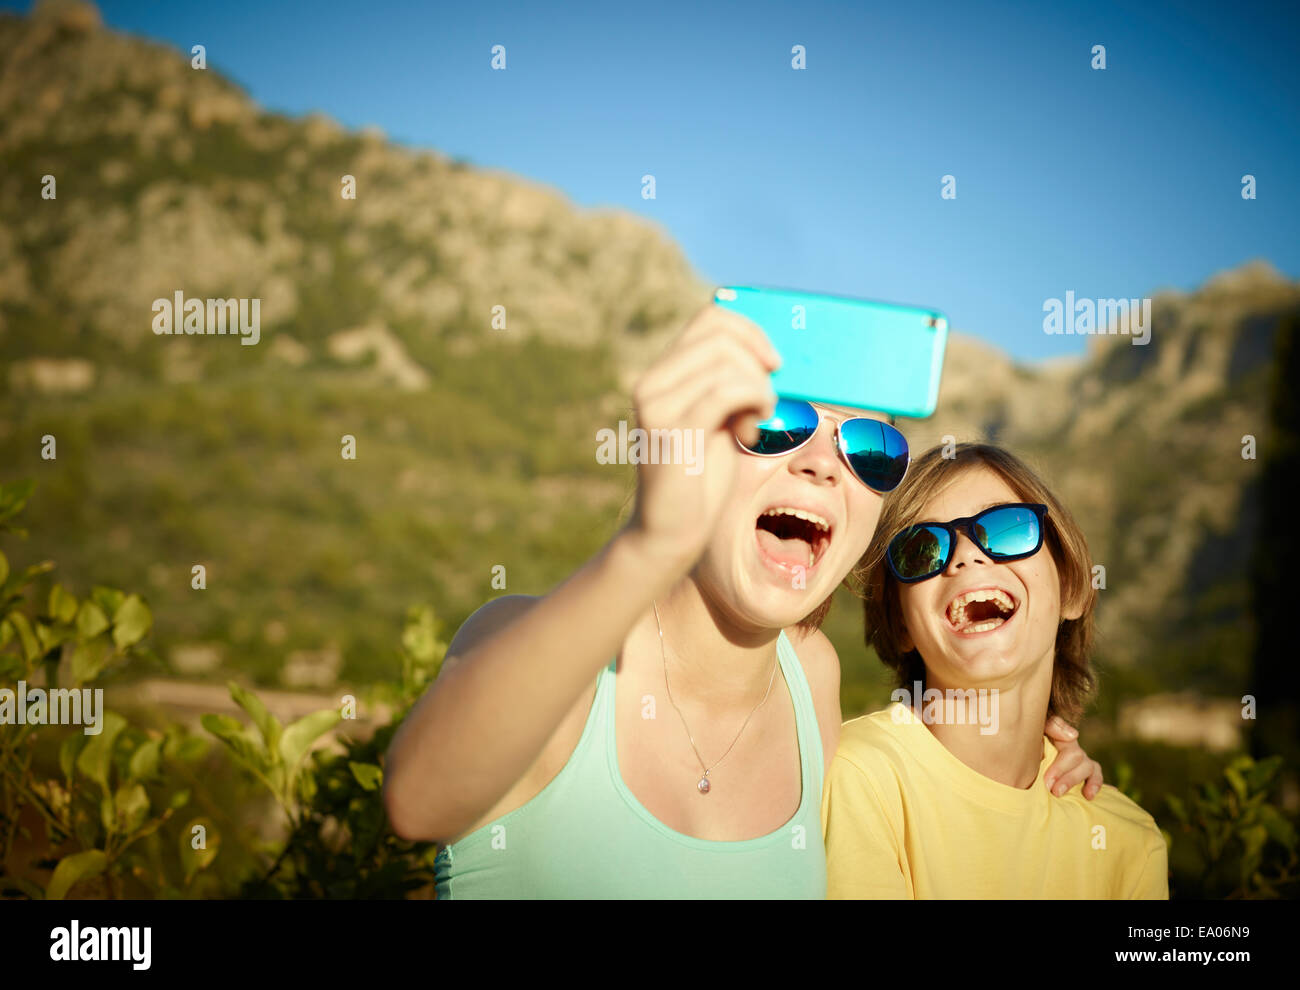 Sister and brother making faces for selfie on smartphone, Majorca, Spain Stock Photo